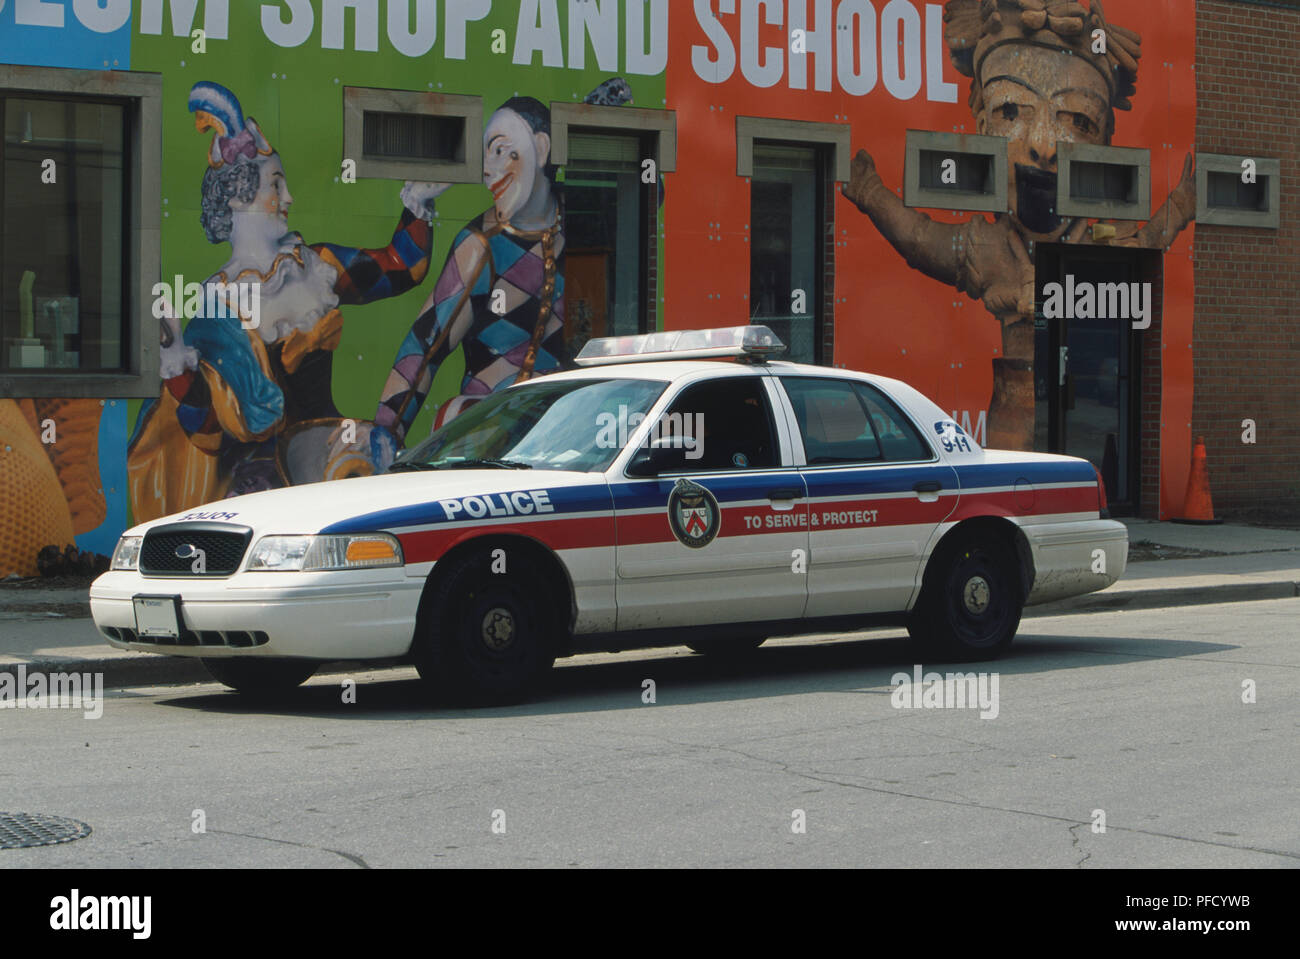 Canada, Toronto, police car parked by colourful wall mural, side view. Stock Photo